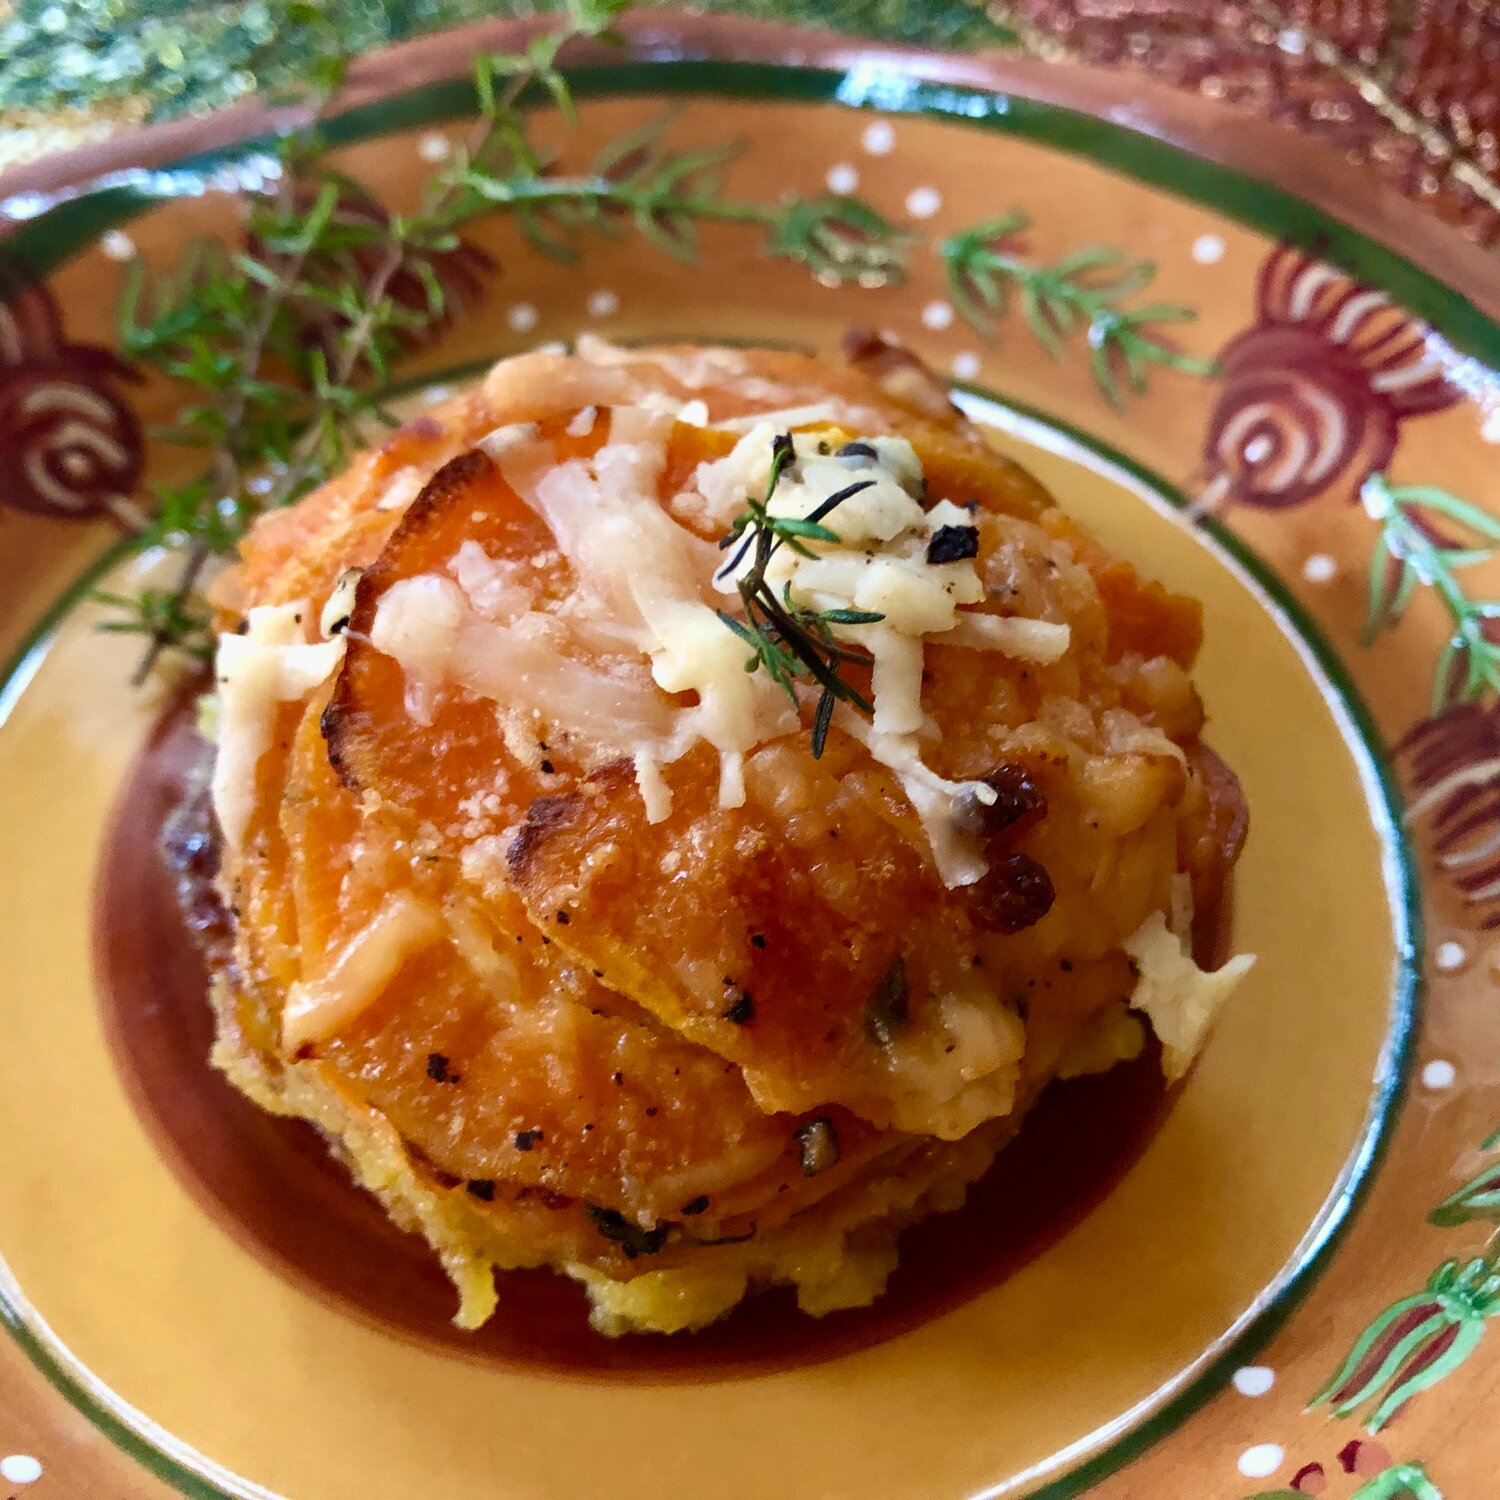 These savory sweet potato stacks are a decadent combination of sweet potato, butter, thyme and sharp Vermont Cheddar cheese.